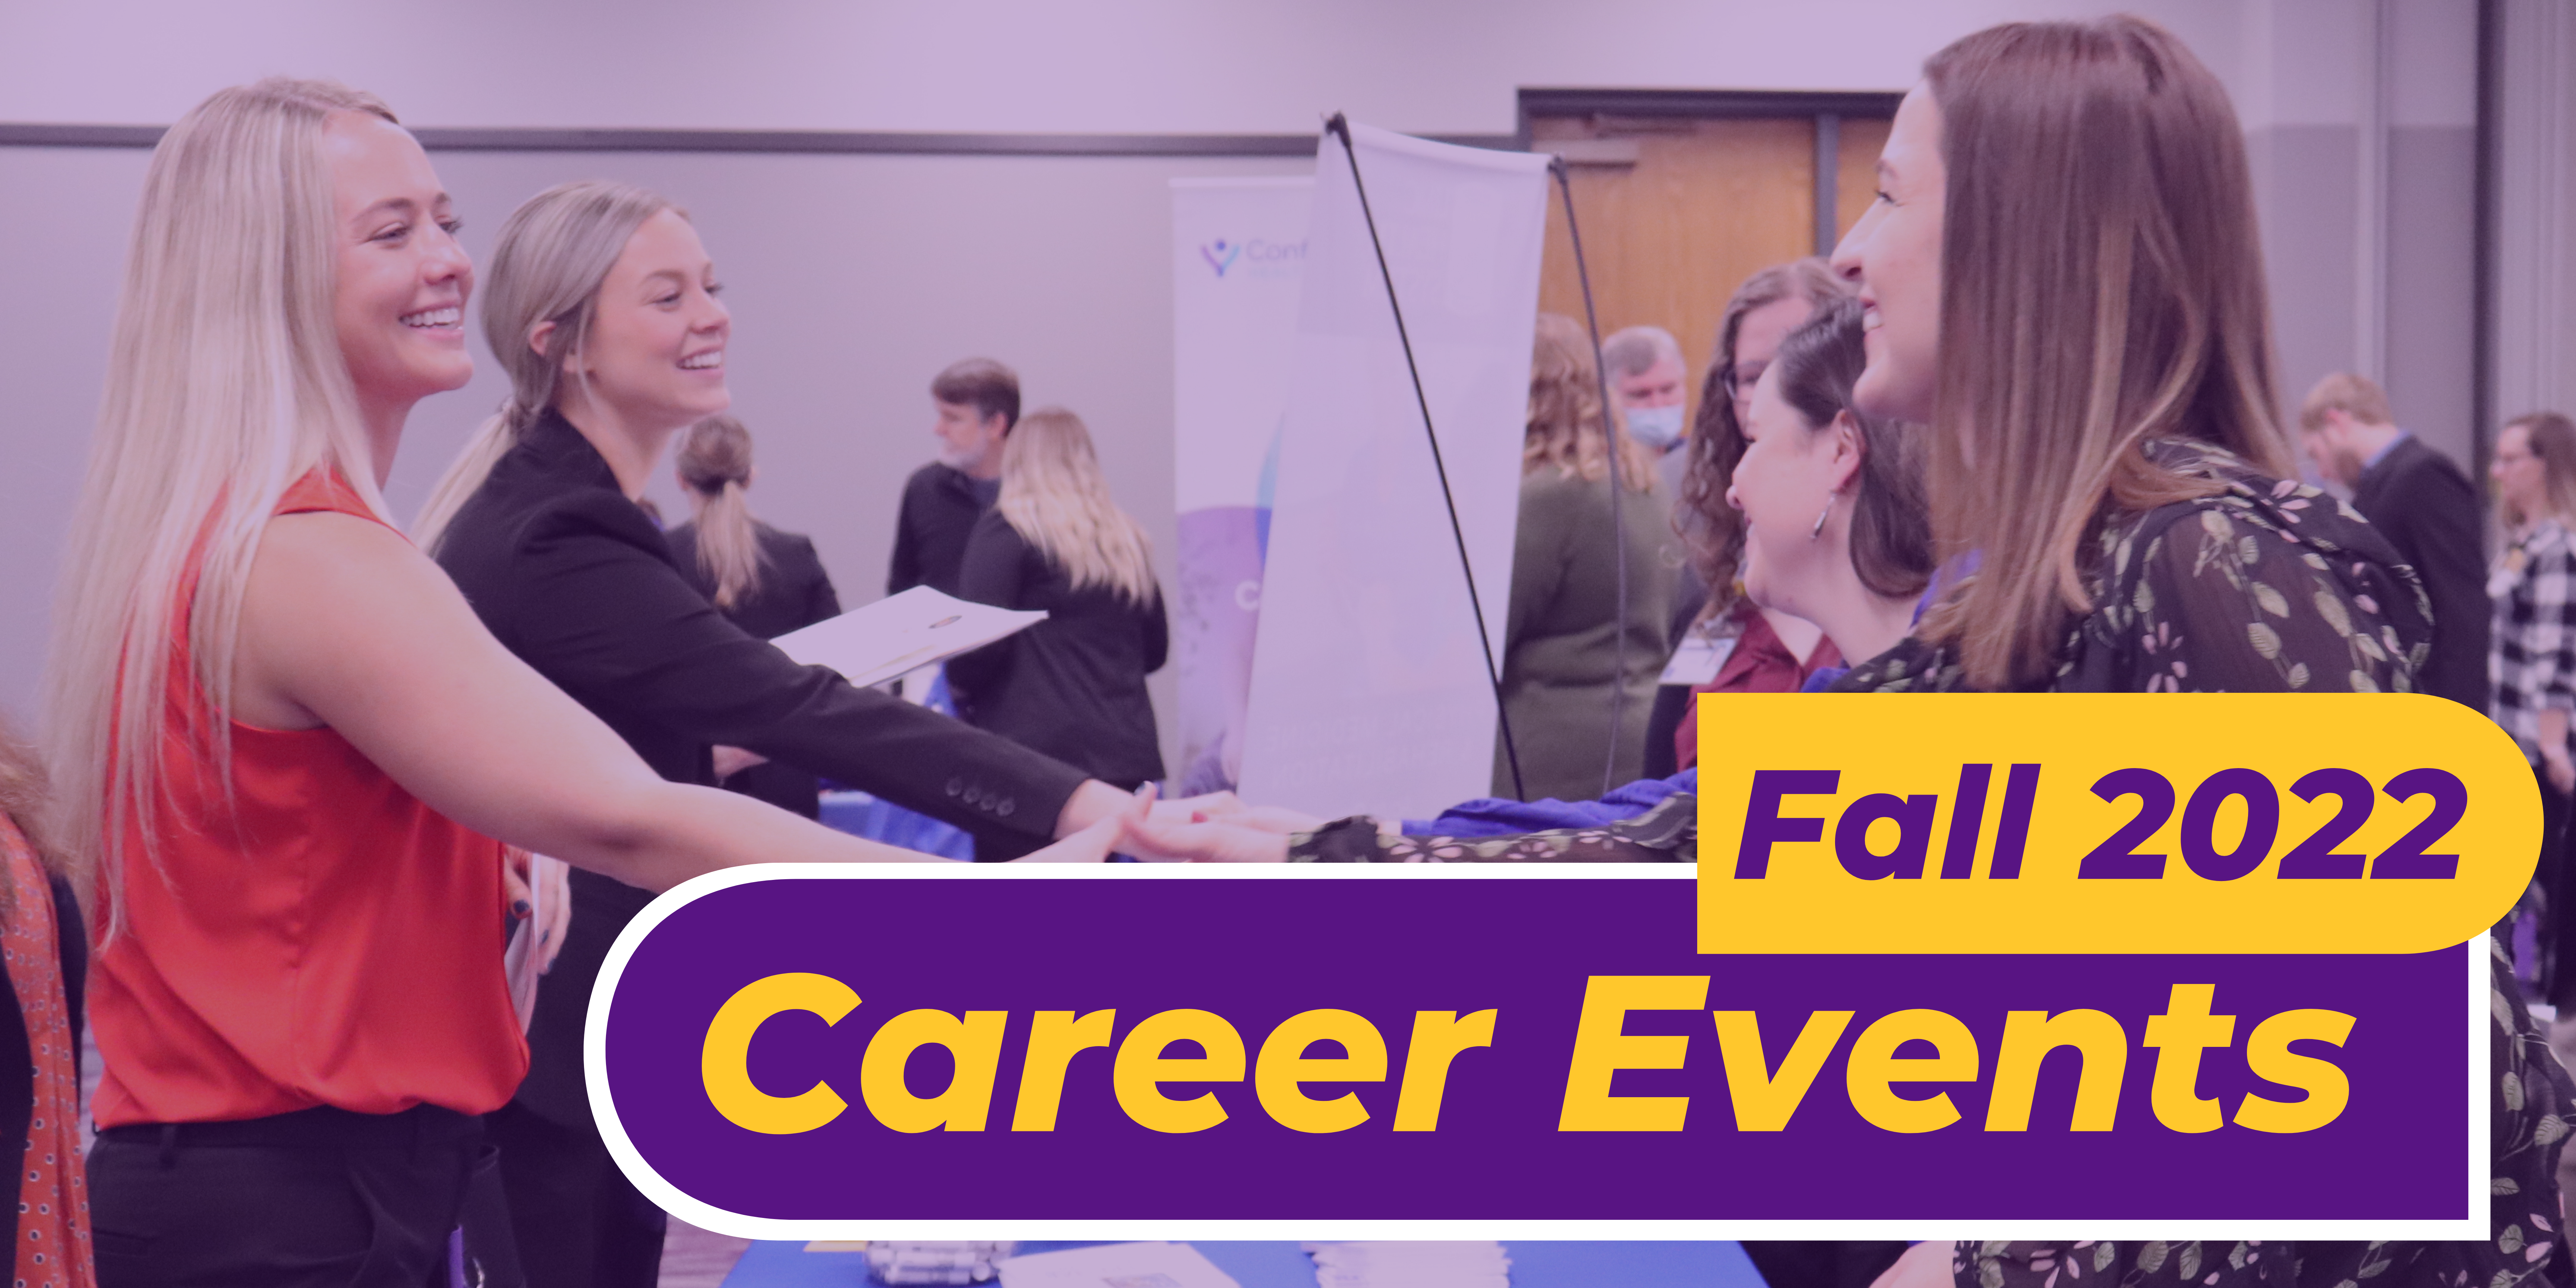 Fall 2022 Career Events